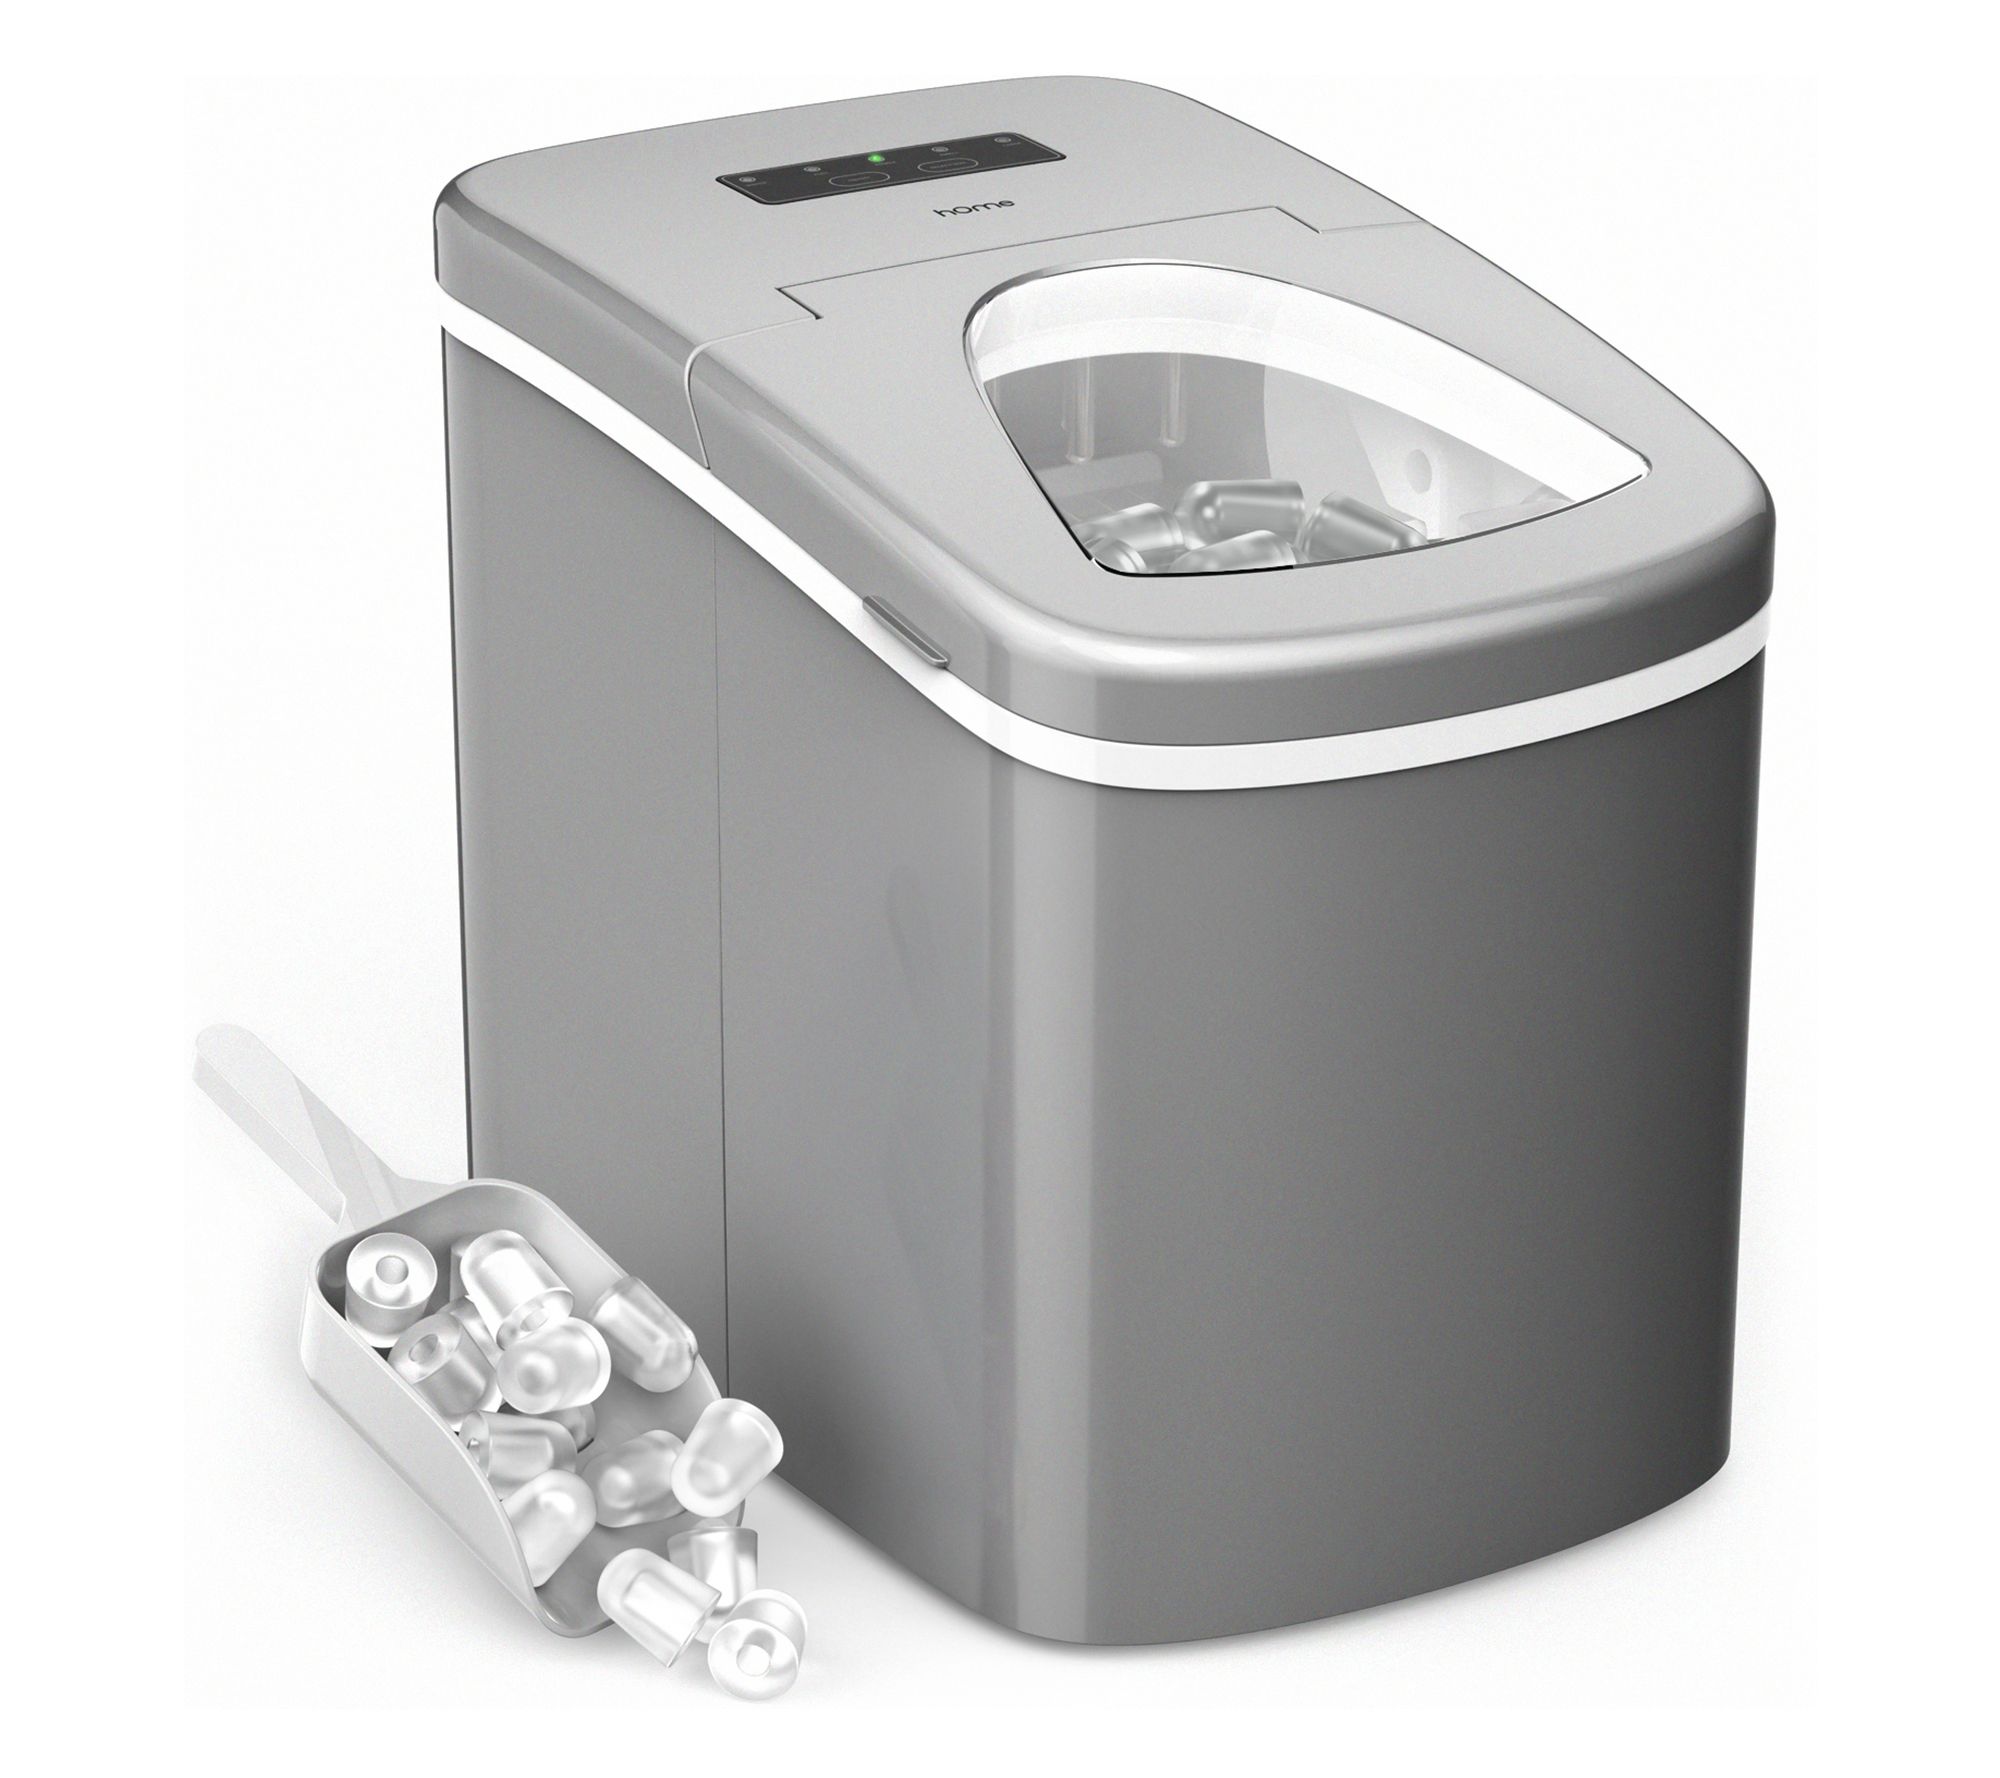 hOmeLabs Portable Countertop Ice Maker — Tools and Toys